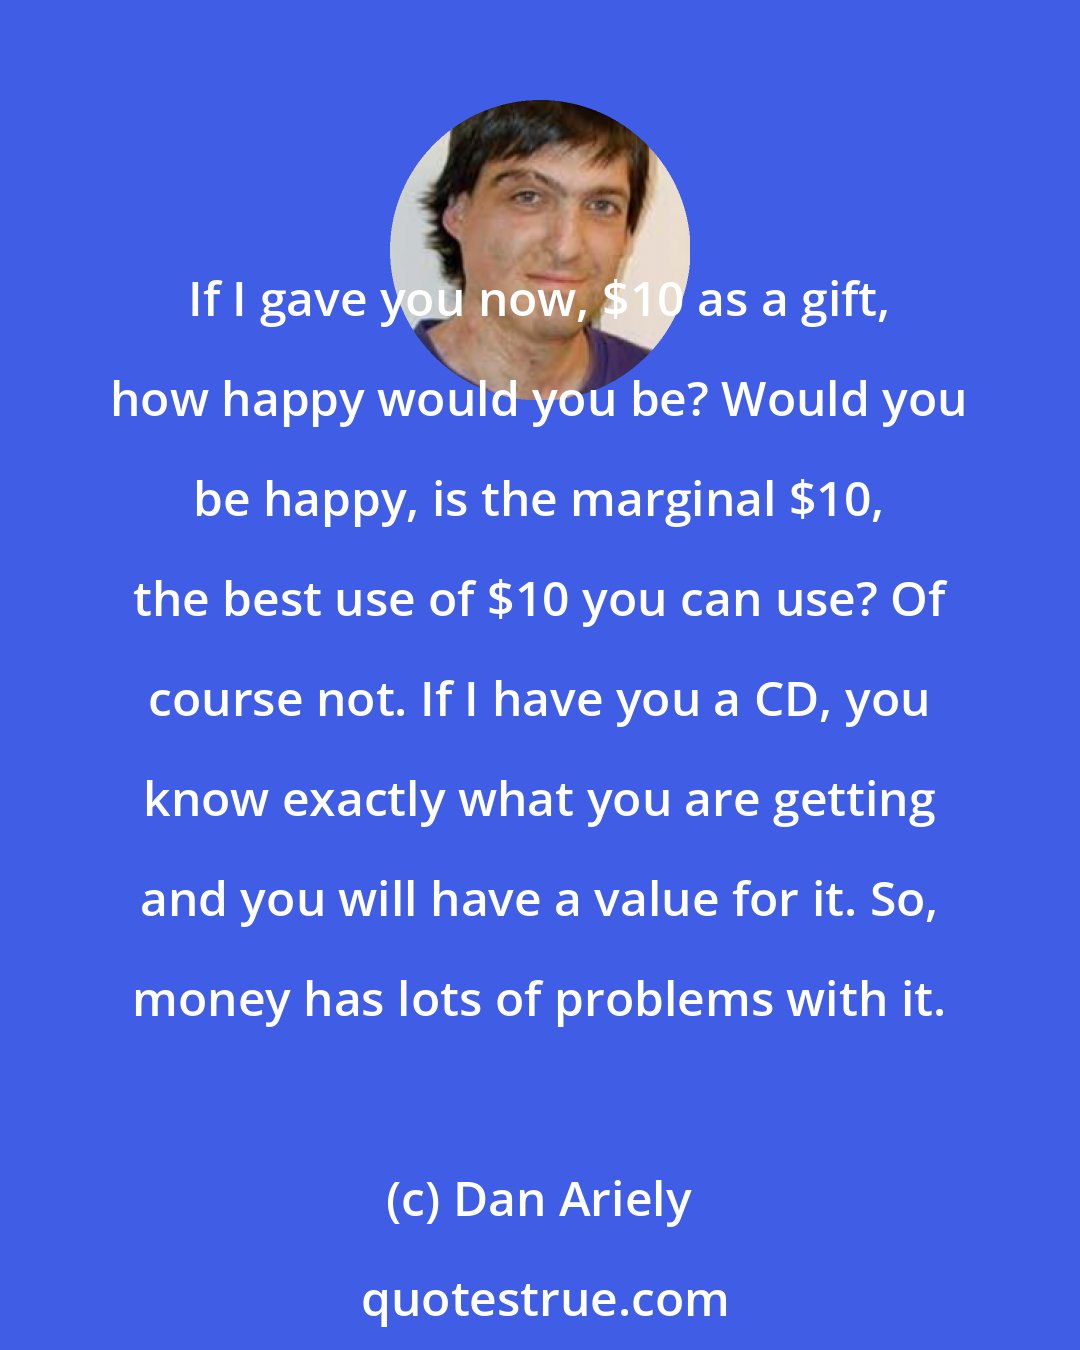 Dan Ariely: If I gave you now, $10 as a gift, how happy would you be? Would you be happy, is the marginal $10, the best use of $10 you can use? Of course not. If I have you a CD, you know exactly what you are getting and you will have a value for it. So, money has lots of problems with it.